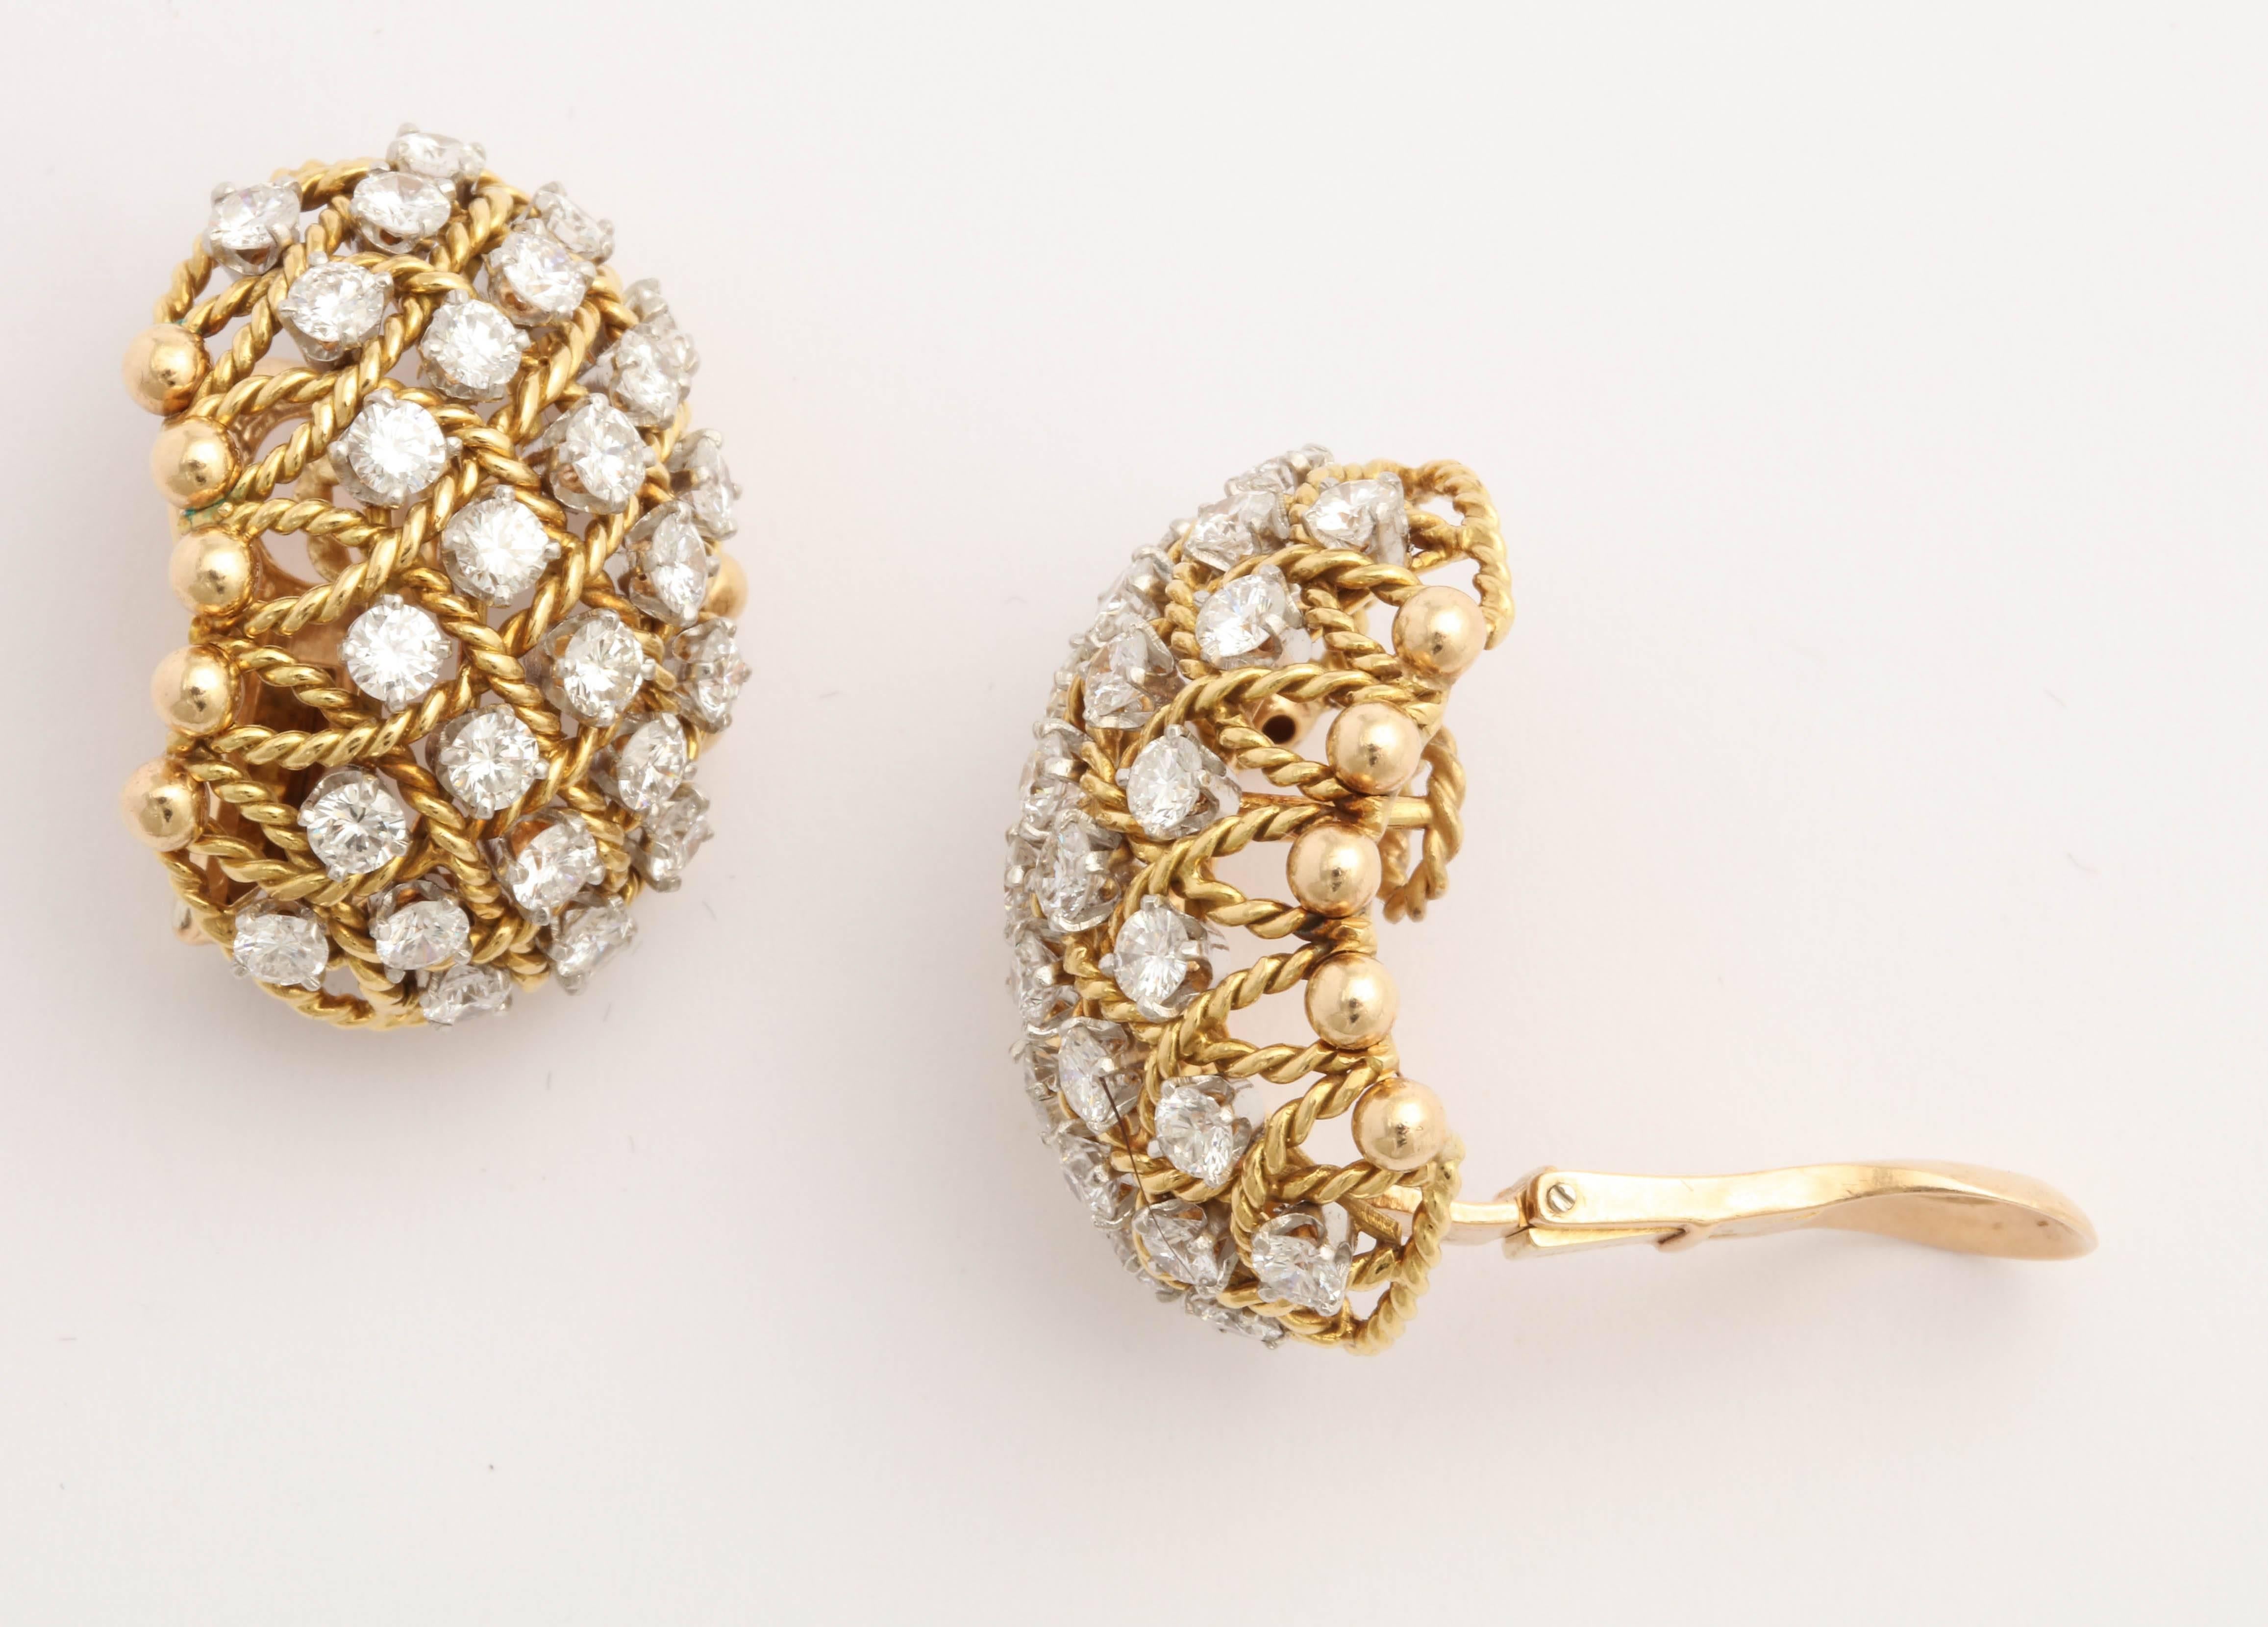 French 18kt Yellow Gold  Basket Earrings set with 56 full cut clean white diamonds set in between a basket weave motif.   Diamonds weighing approximately 6 carats total.  1980's. 